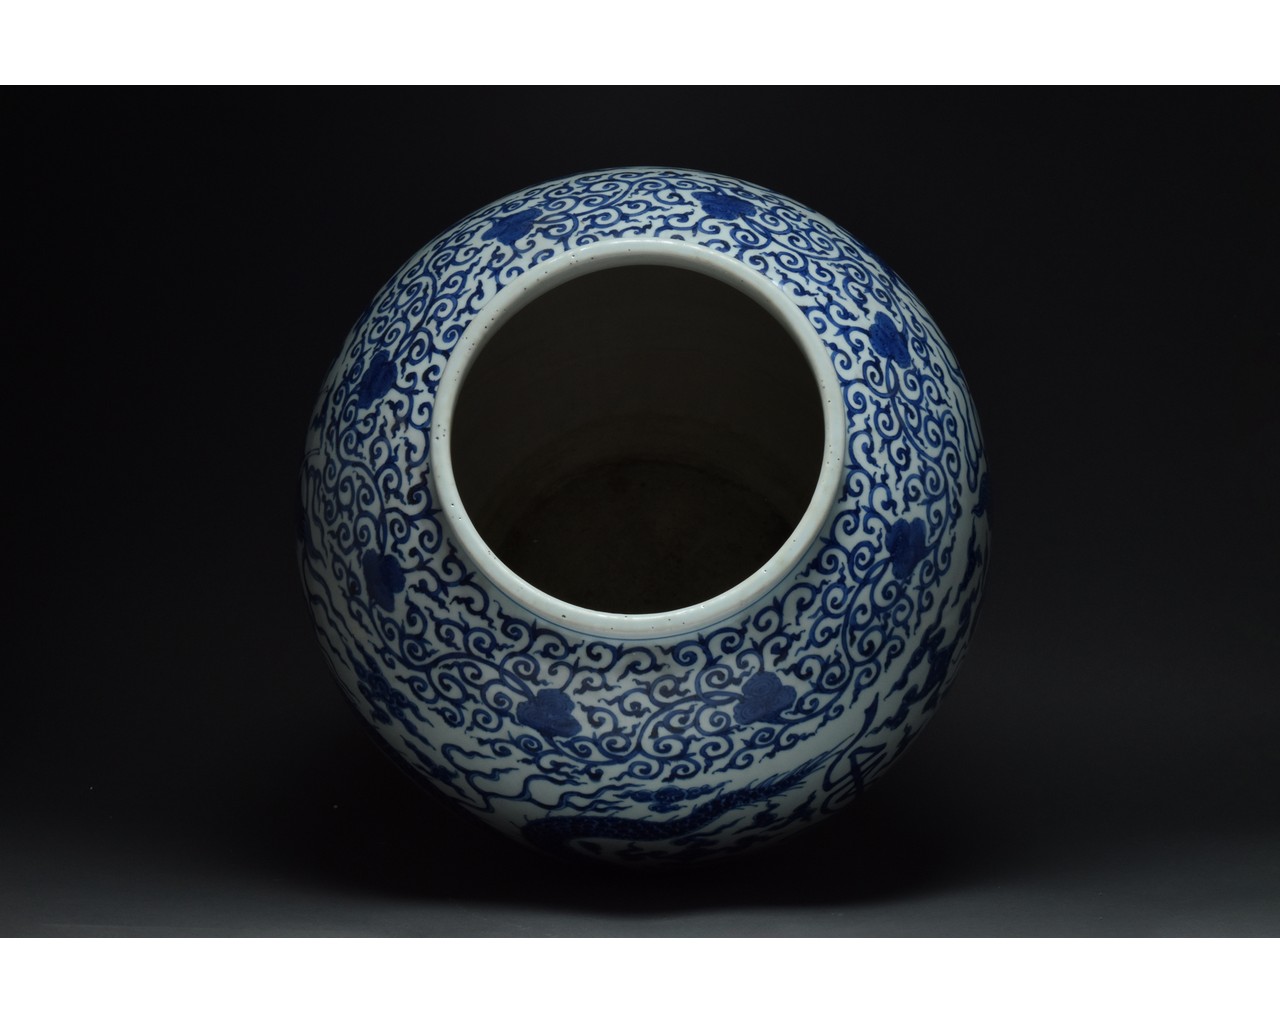 MAGNIFICENT CHINESE MING DYNASTY "DRAGON JAR" - Image 4 of 9